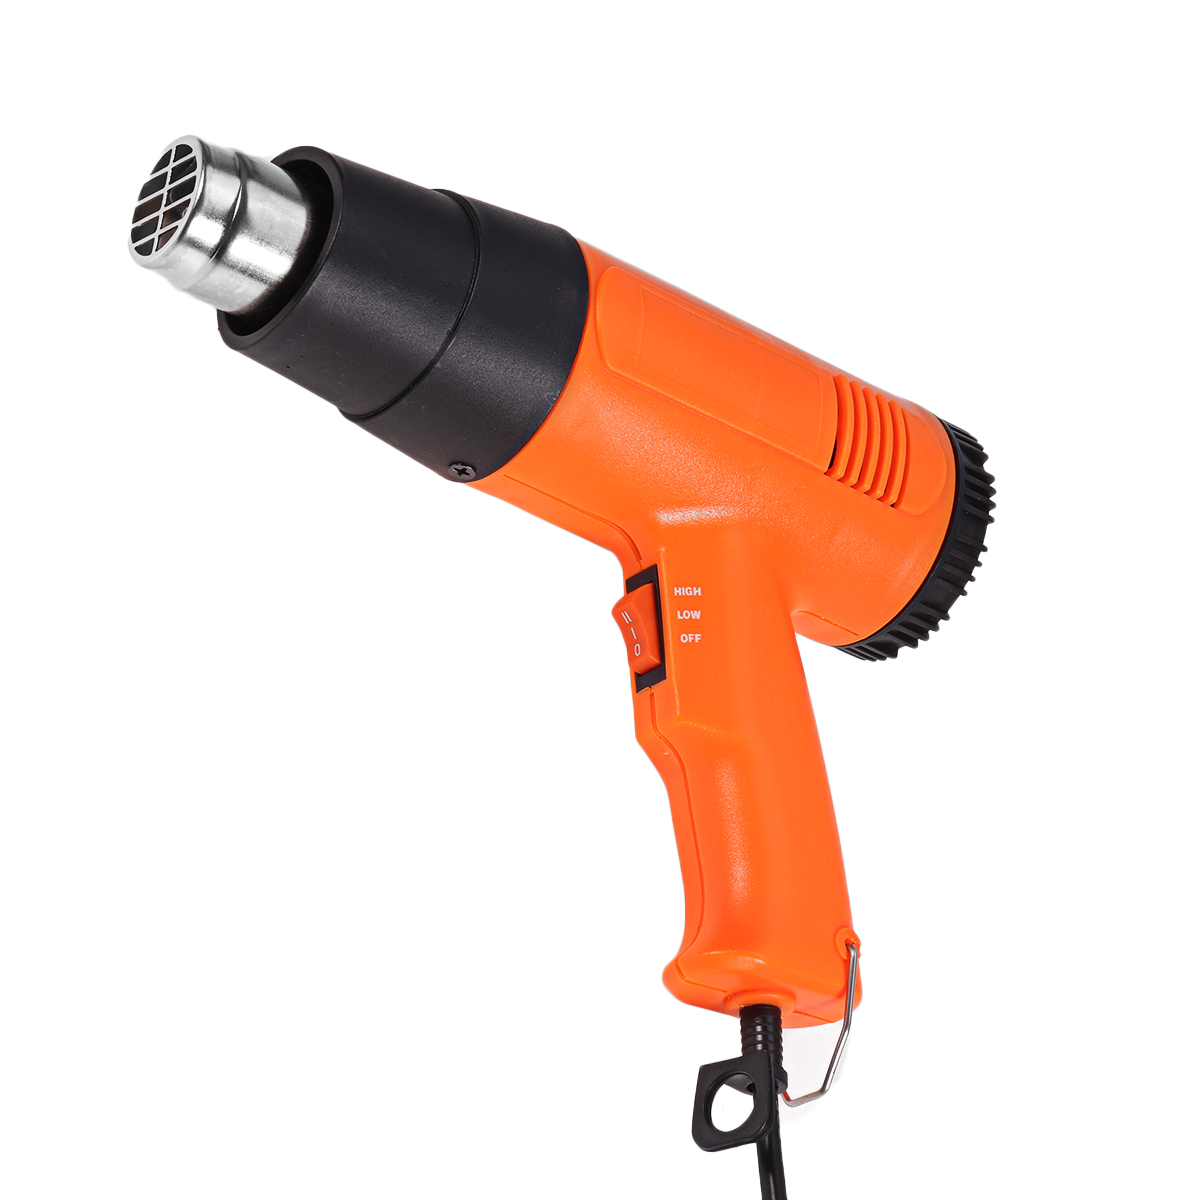 220V-2000W-Electric-Hot-Air-Heater-Heating-Tool-Shrink-Wrapping-Thermal-Power-Tool-1784452-4